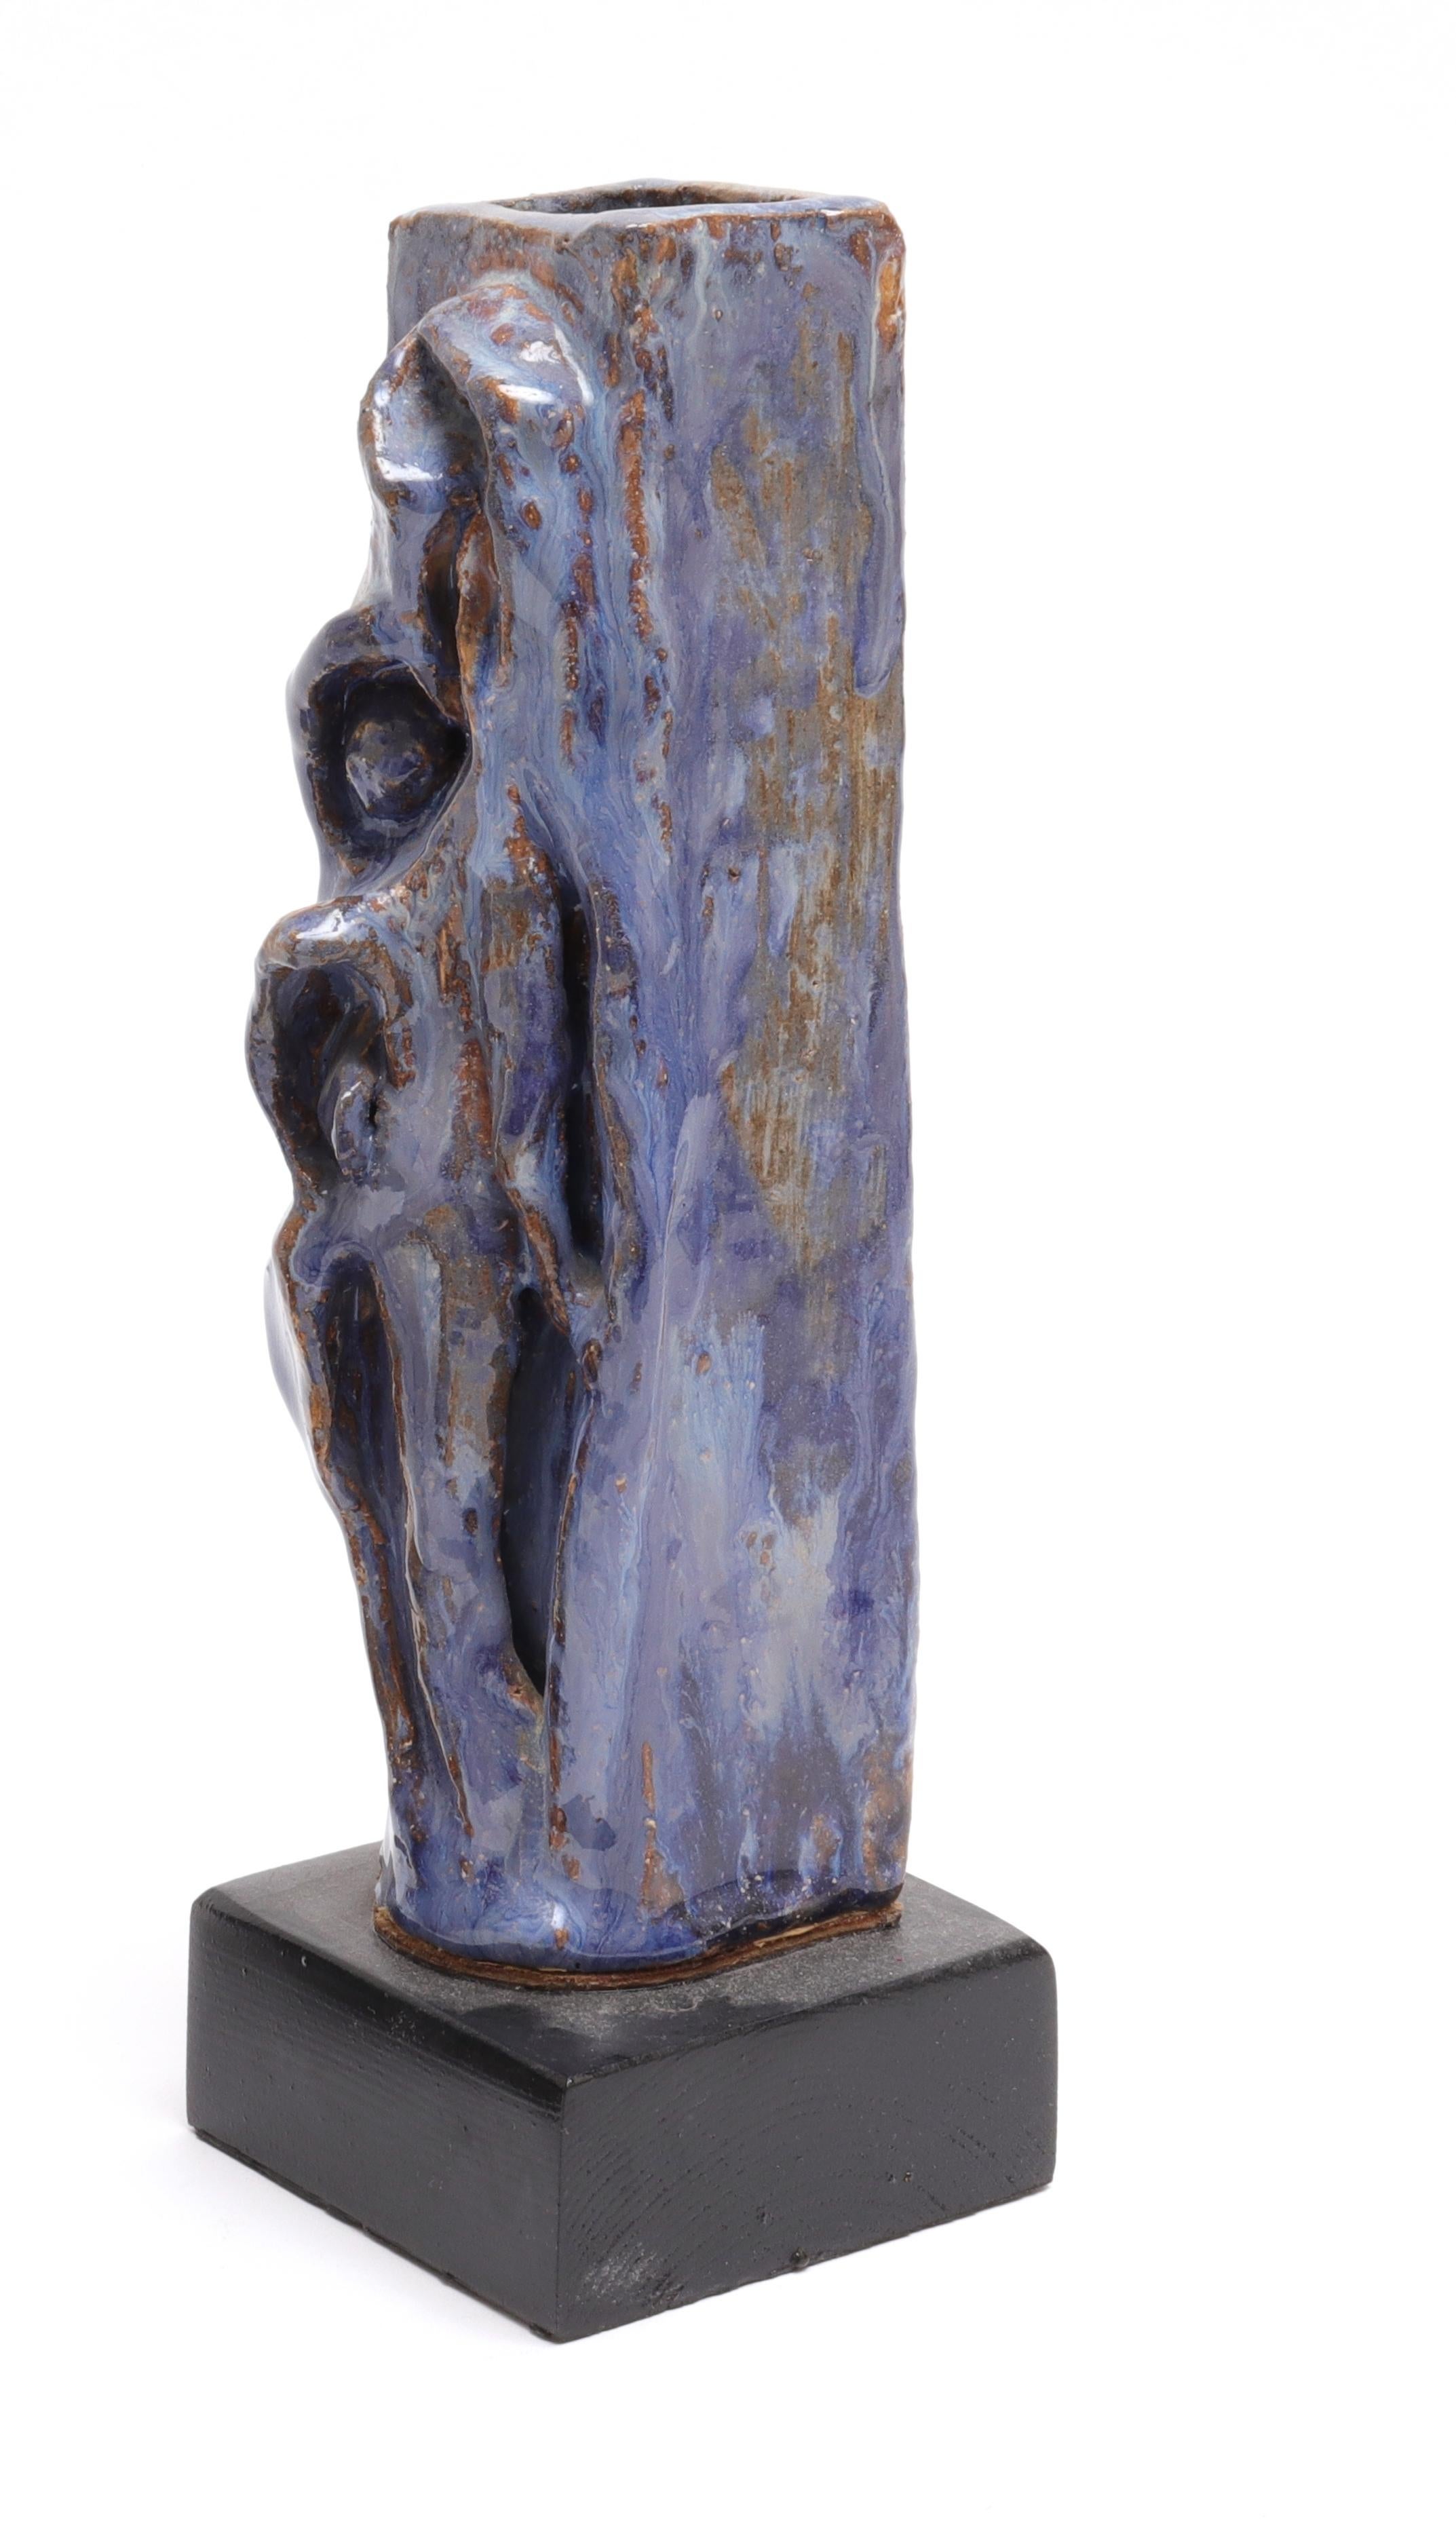 Contemporary art pottery vase with blue-green glaze, tall rectangular form with sculpted stylized figural decoration and mounted to wood block base.